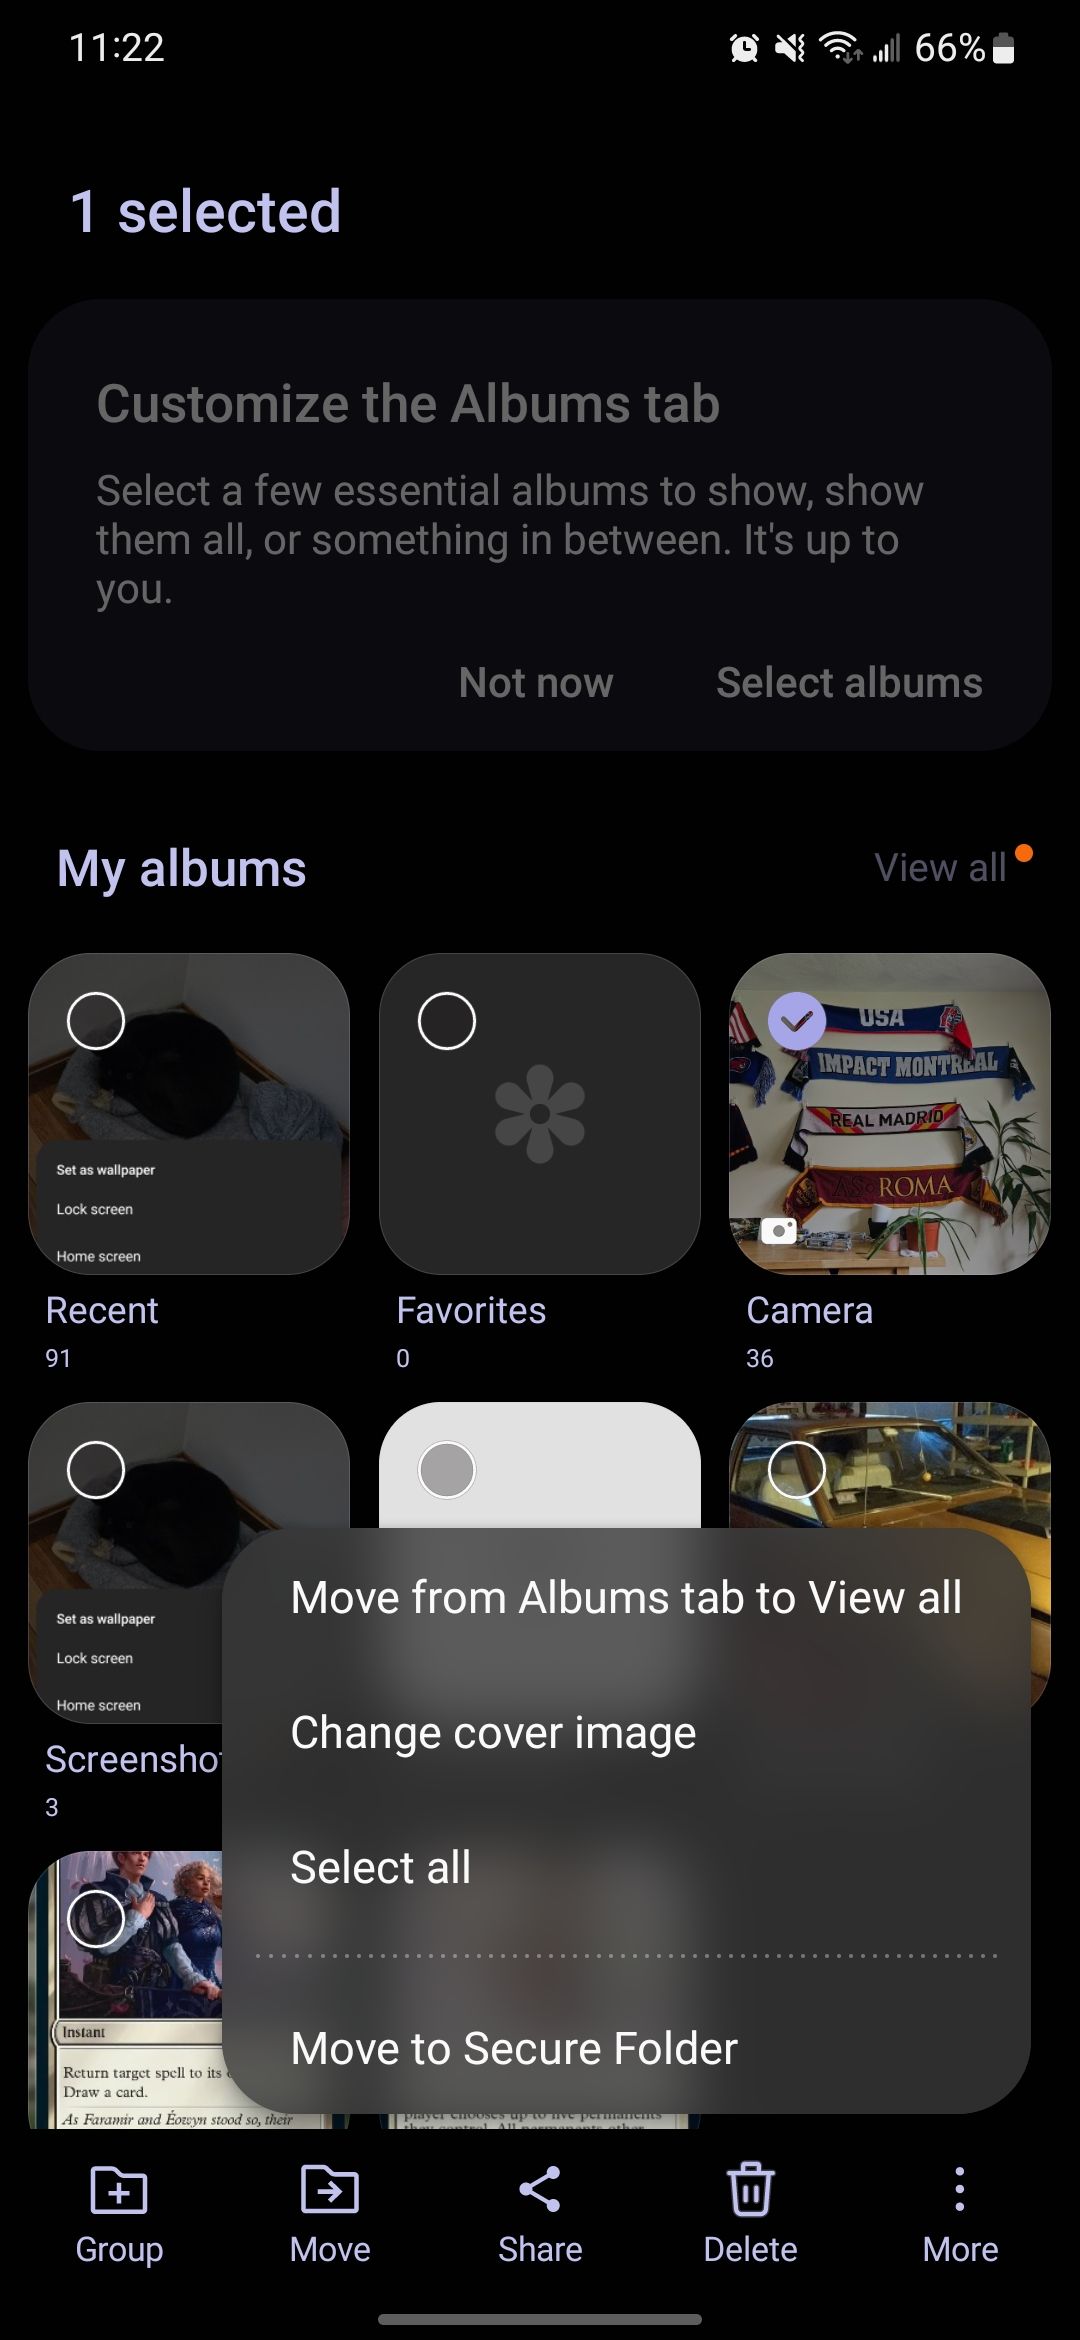 More options for a selected album in the Samsung Gallery app